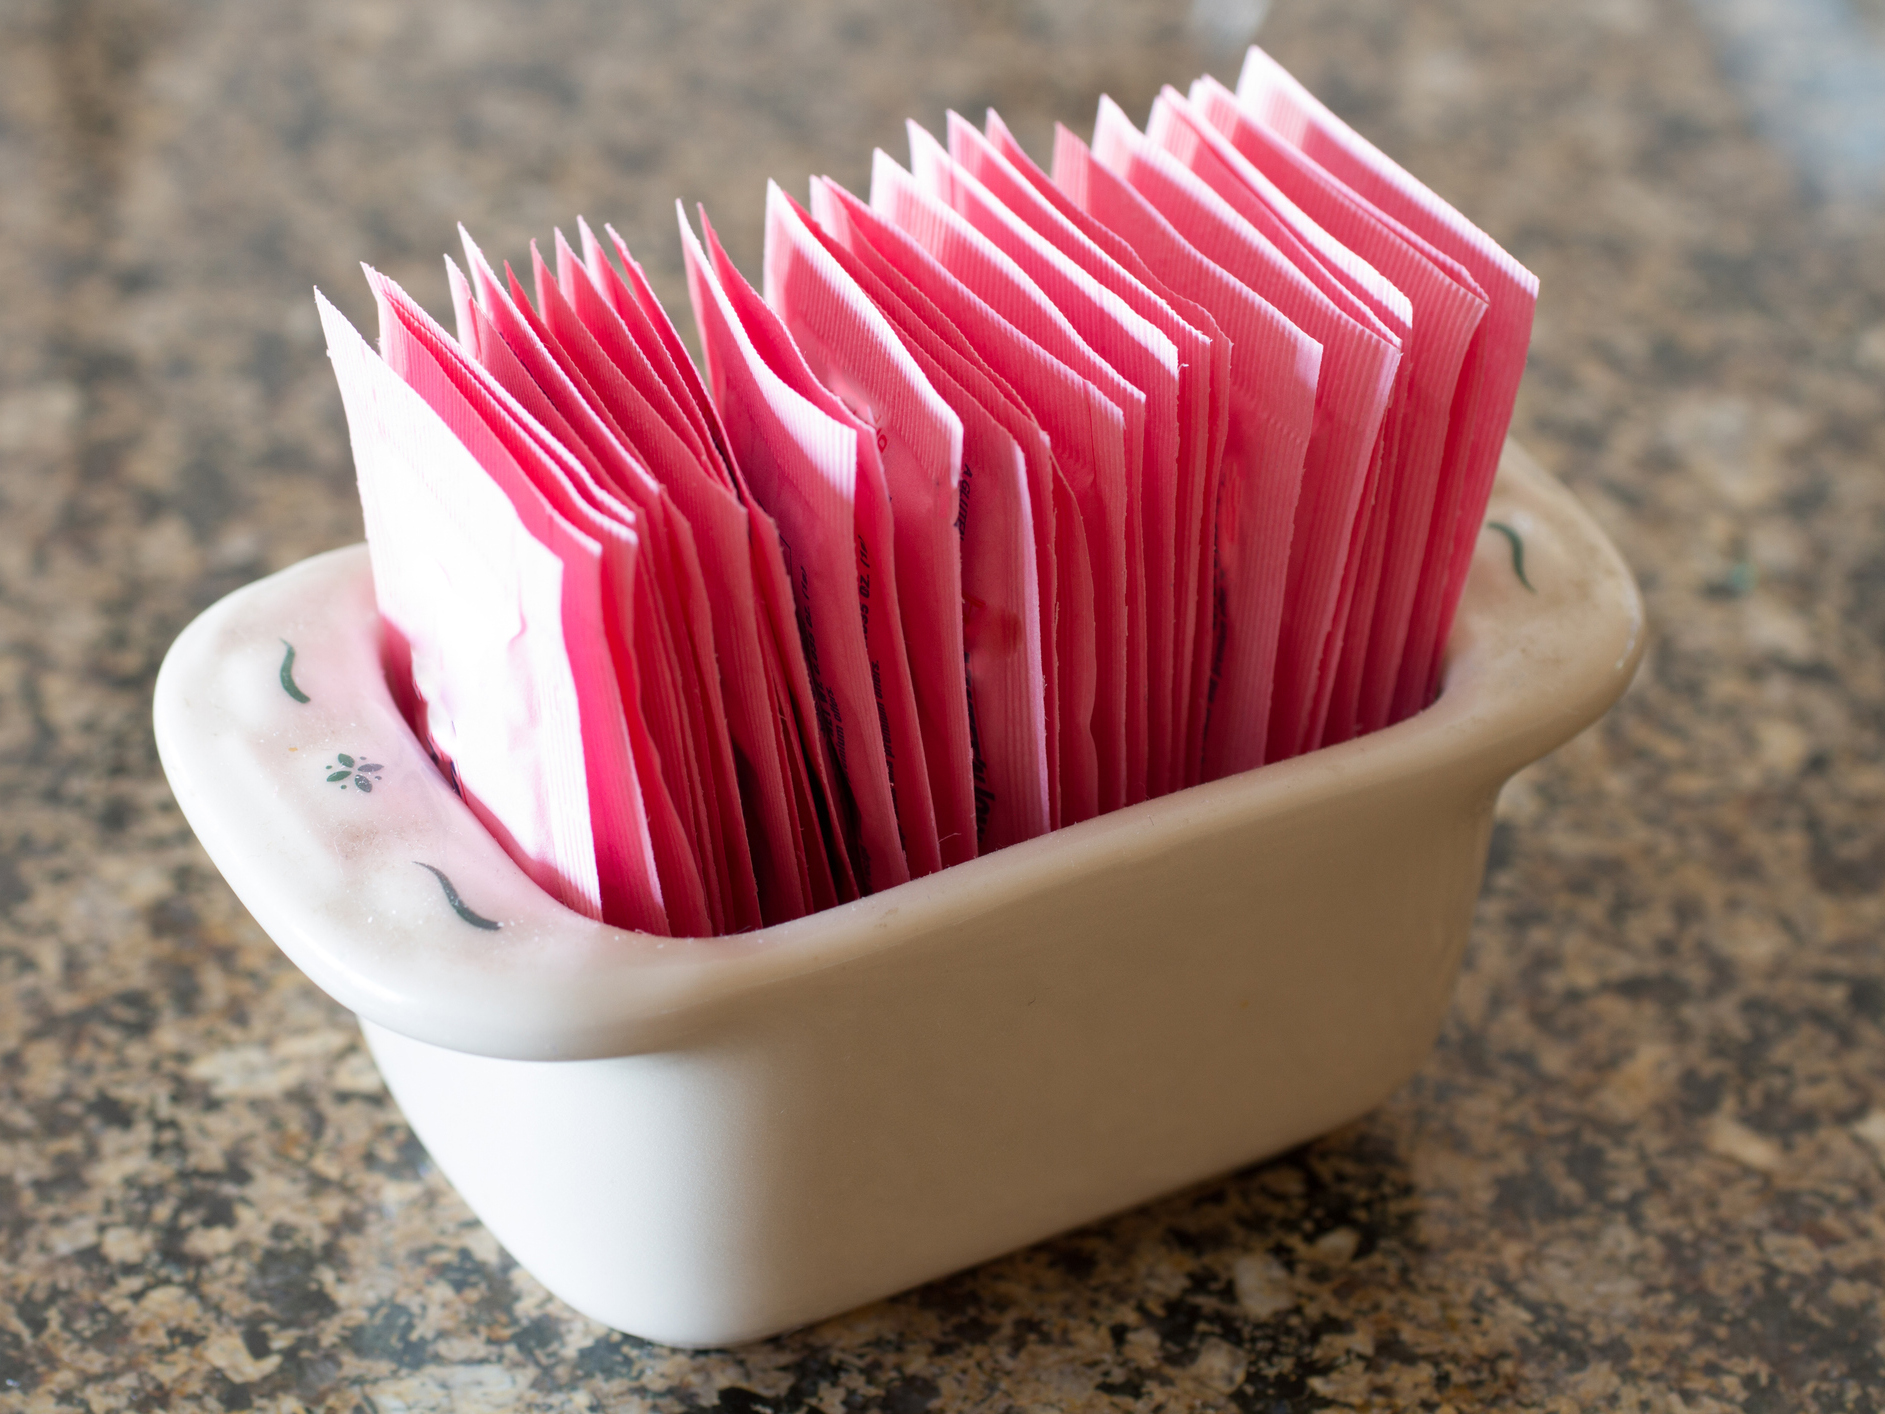 The artificial sweetener pitfall that packs on pounds and leads to disease